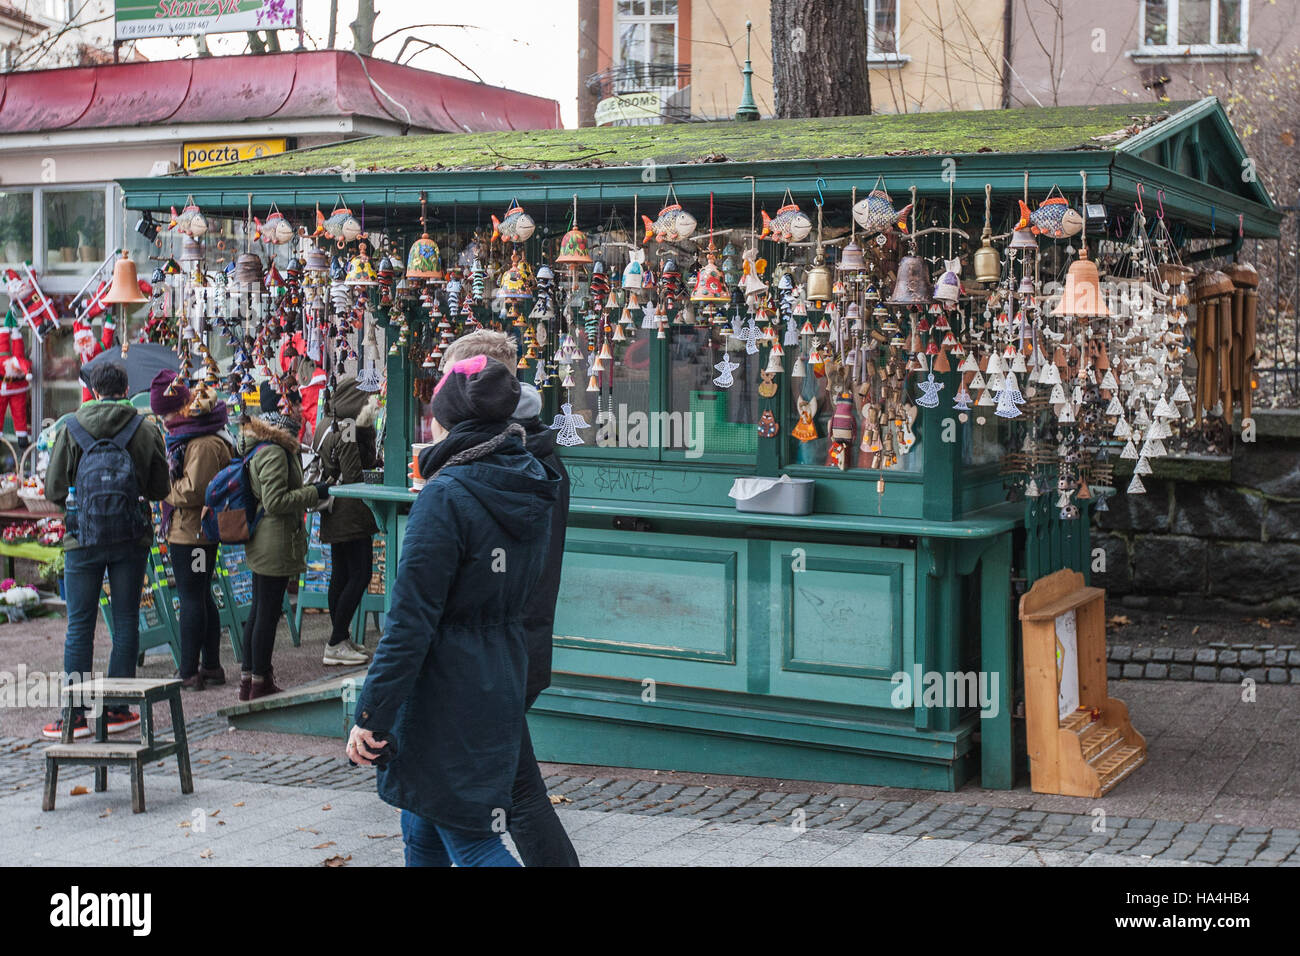 Sopot, Poland 27 November 2016 Cold day in Sopot. People wearing winter clothes walking in front of souvenirs shop at the Bohaterow Monte Cassiono street are seen Meteorologists predict high snow fall in next few hours. Credit:  Michal Fludra/Alamy Live News Stock Photo